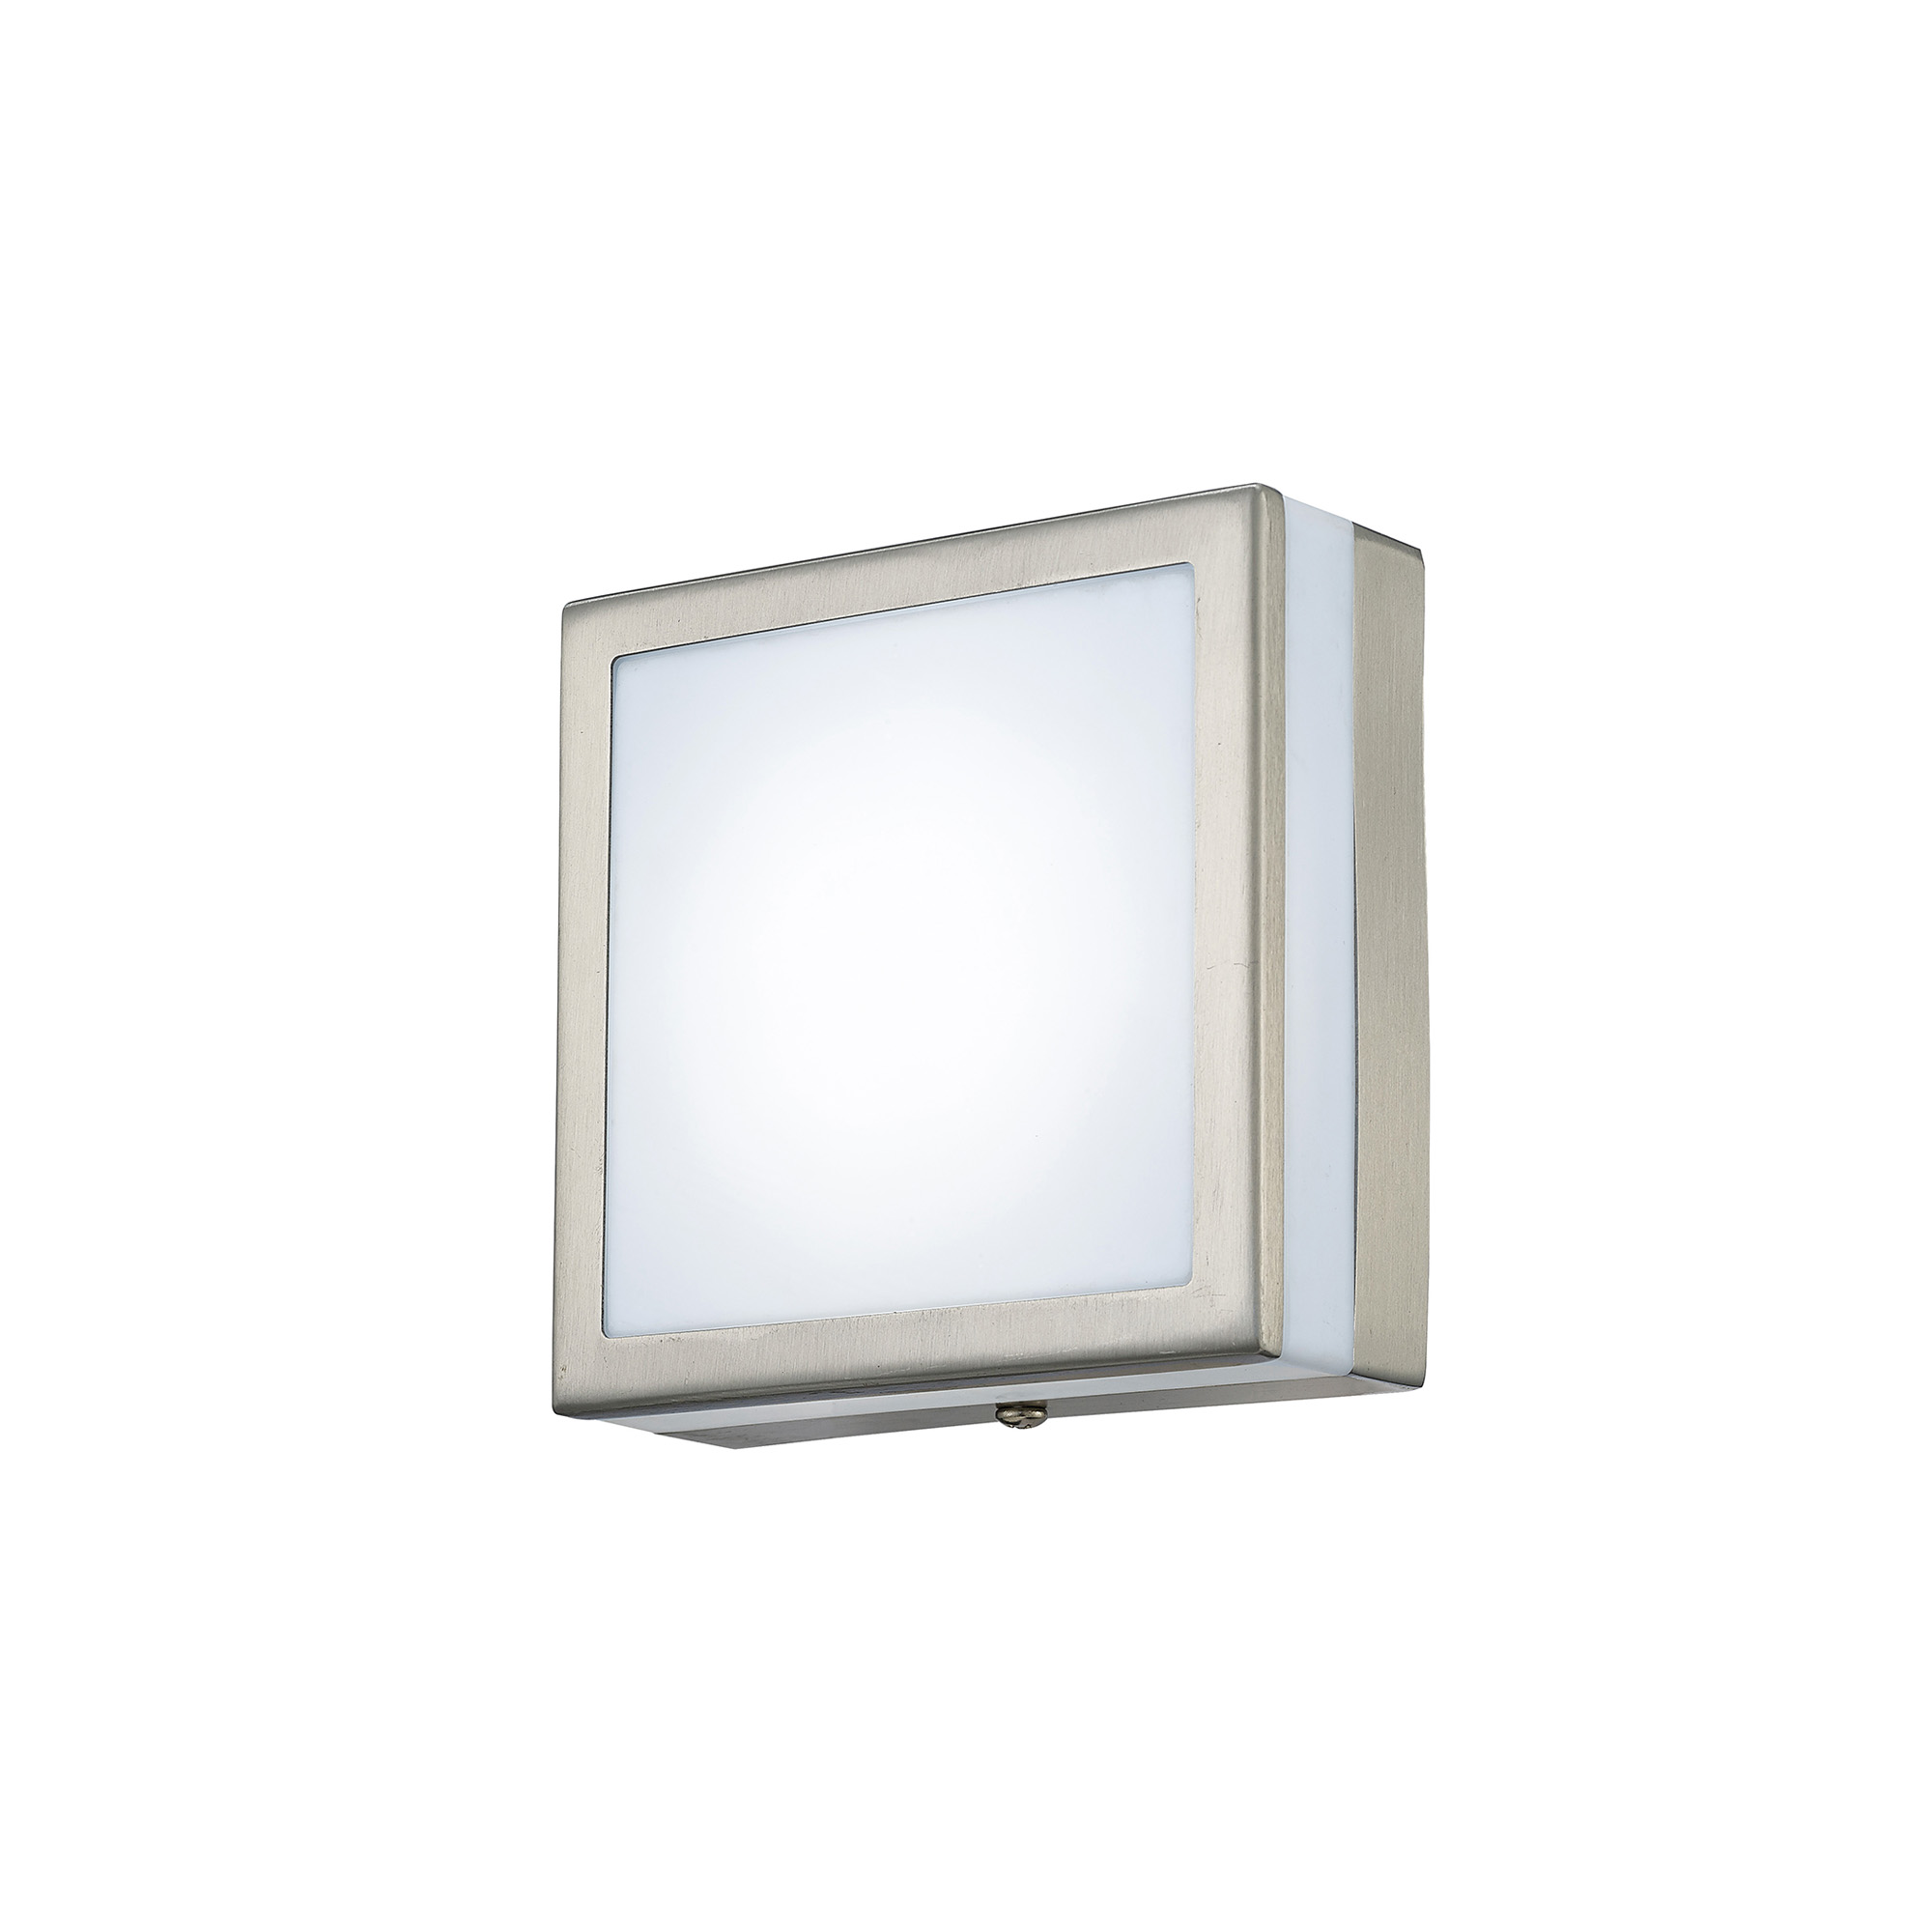 D0083  Aldo IP44 2.4W LED Square Wall Lamp, Louvre Design Stainless Steel